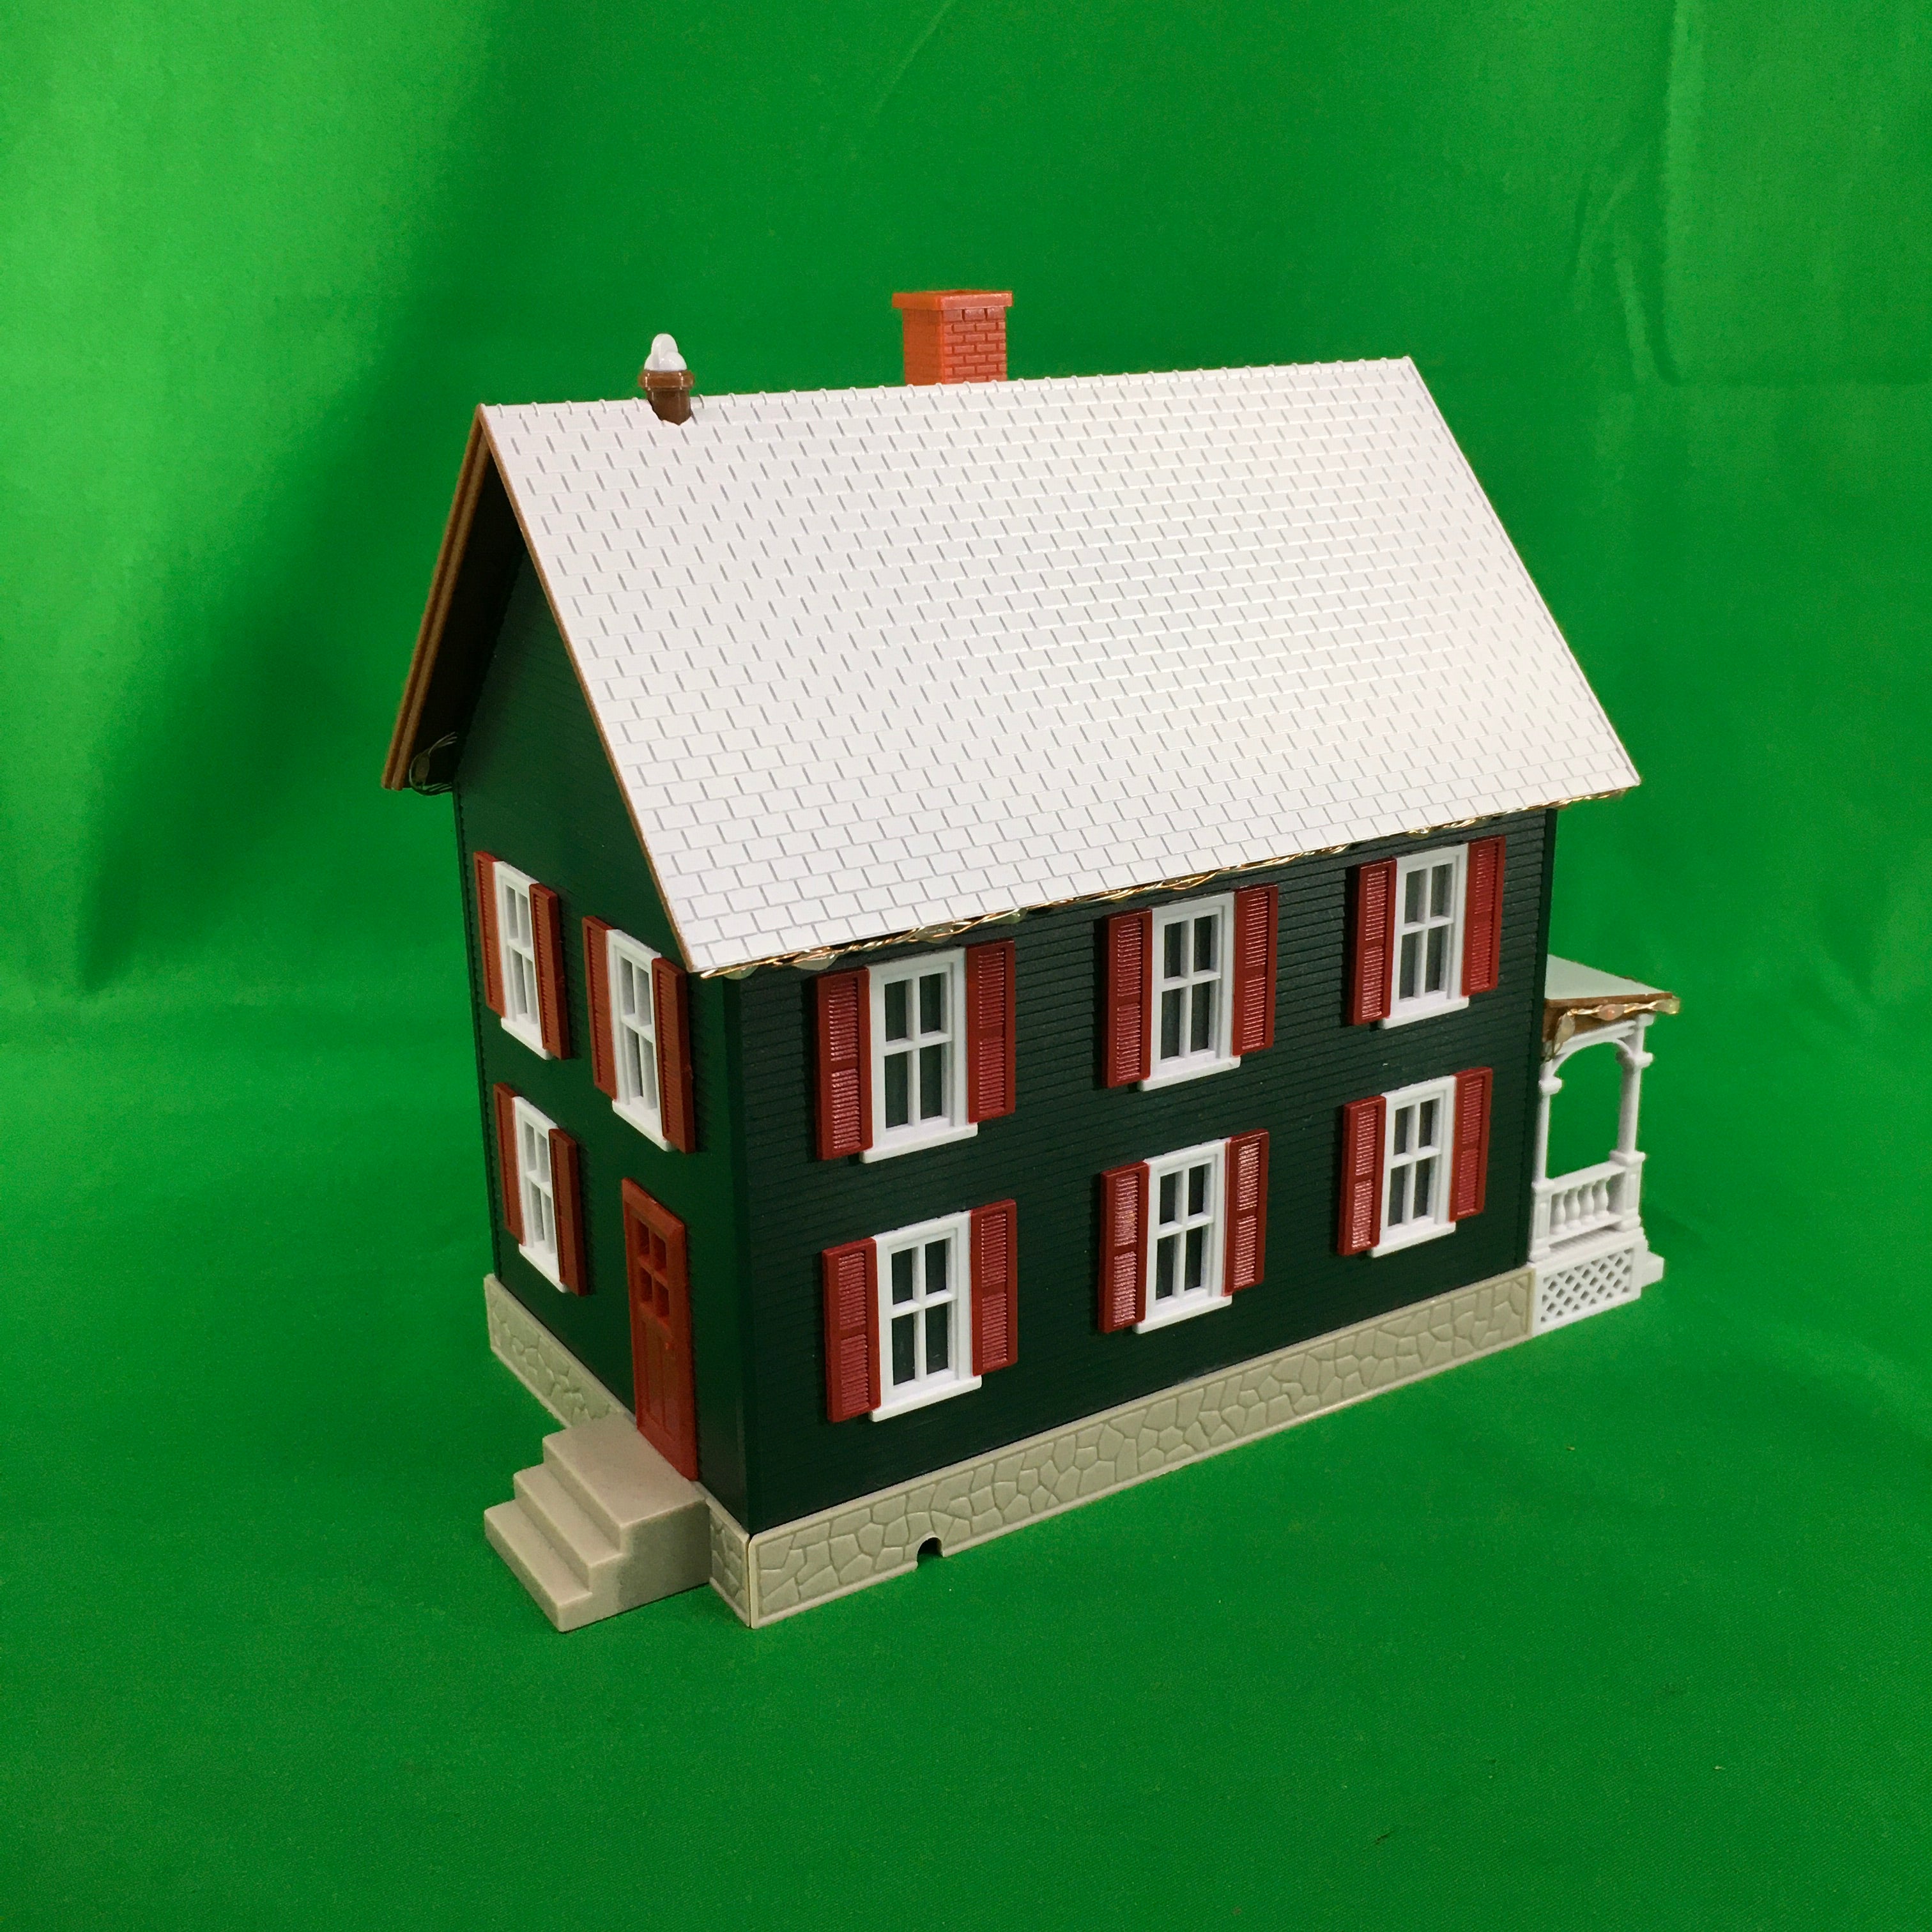 Lionel 2229290 - House Christmas "Up on the Rooftop"